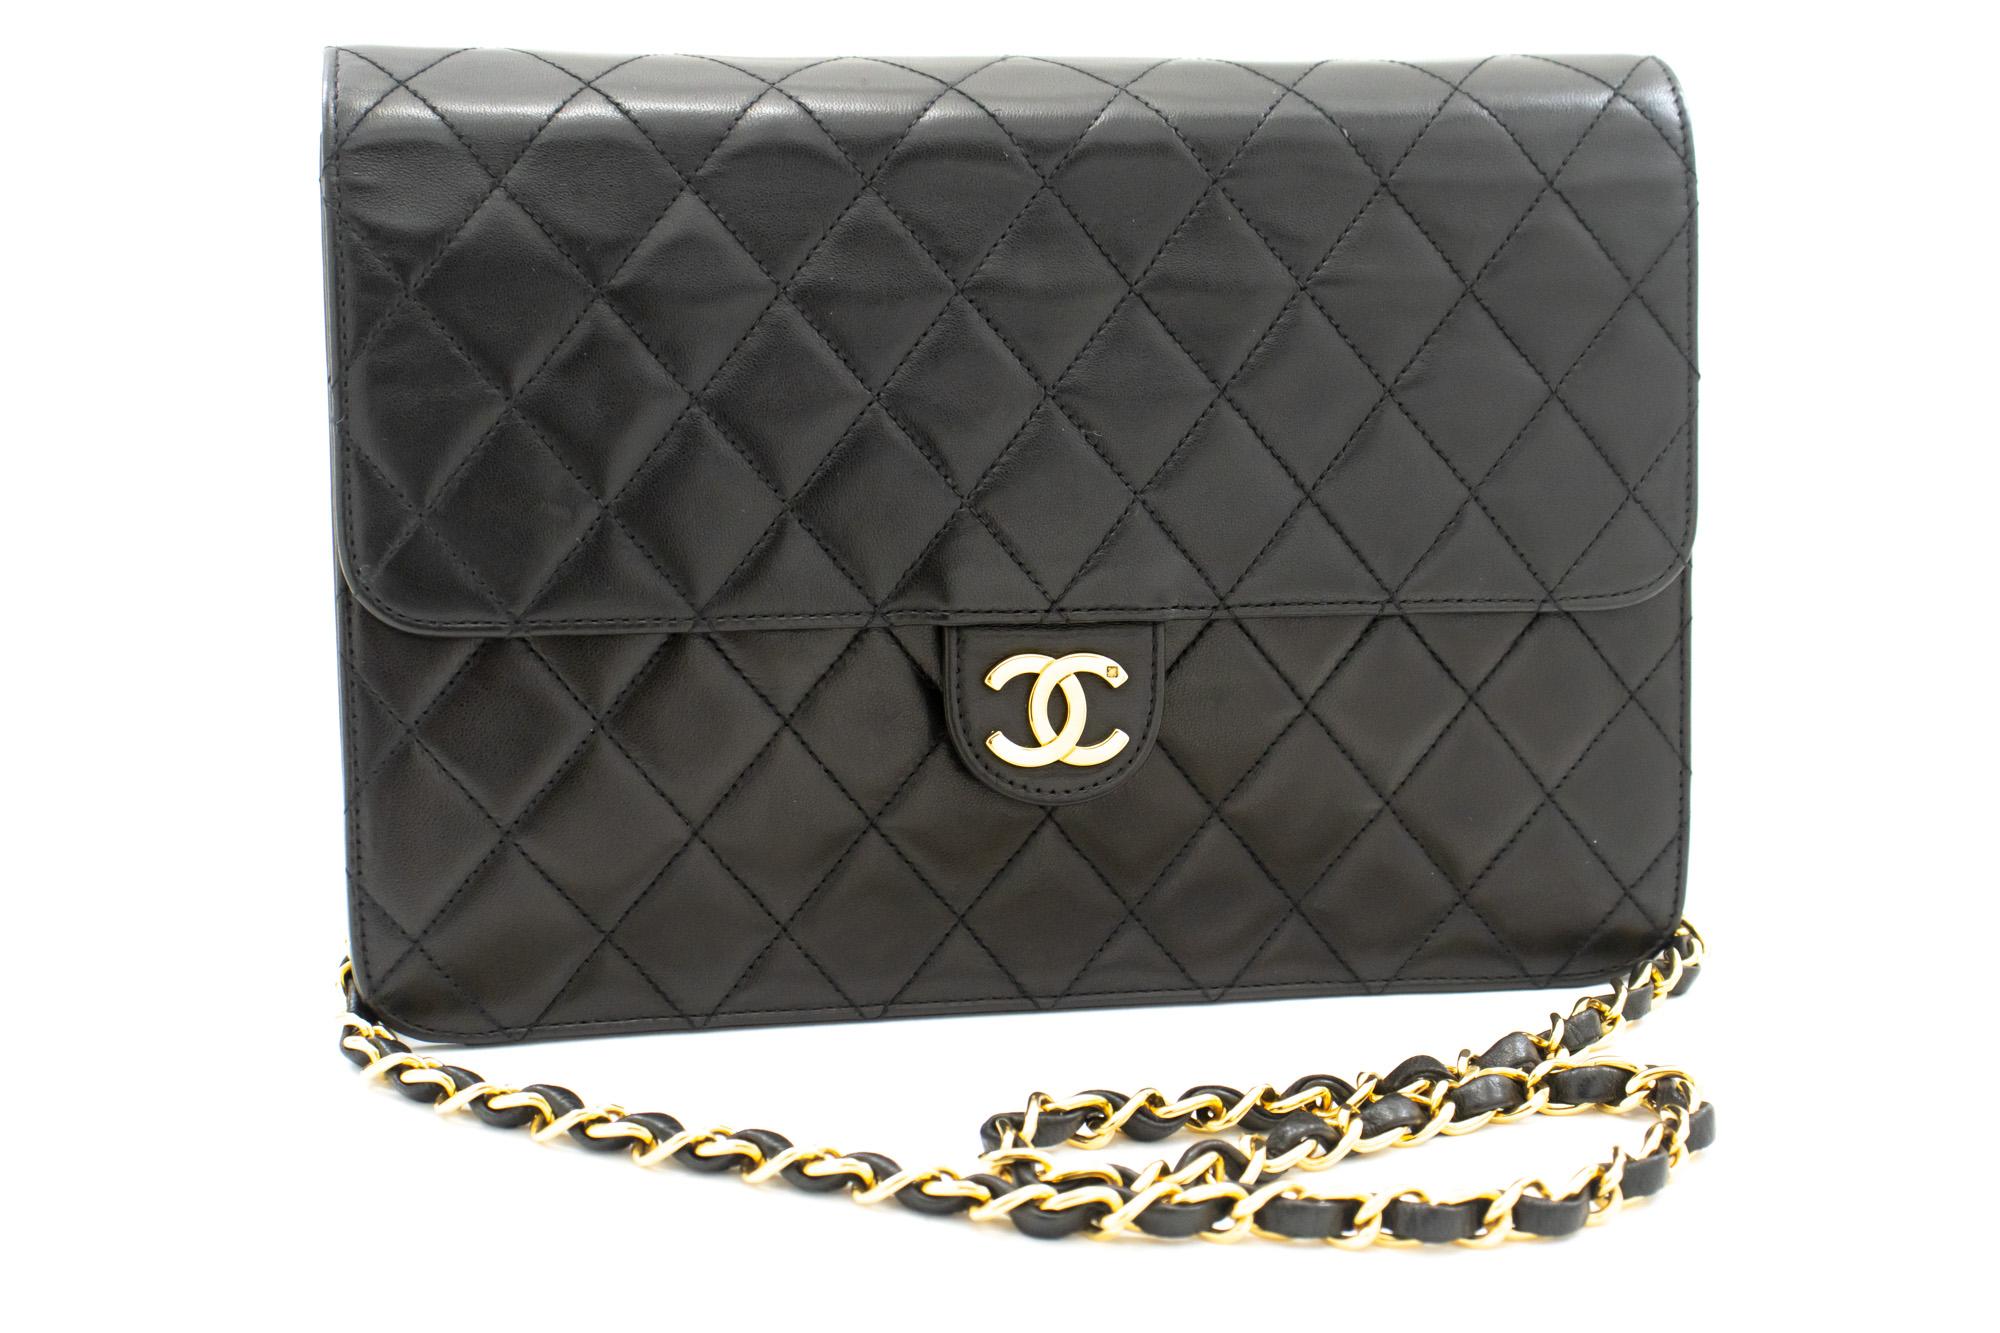 An authentic CHANEL Chain Shoulder Bag Clutch Dark Navy Quilted Flap made of black Lambskin. The color is Navy. The outside material is Leather. The pattern is Solid. This item is Vintage / Classic. The year of manufacture would be